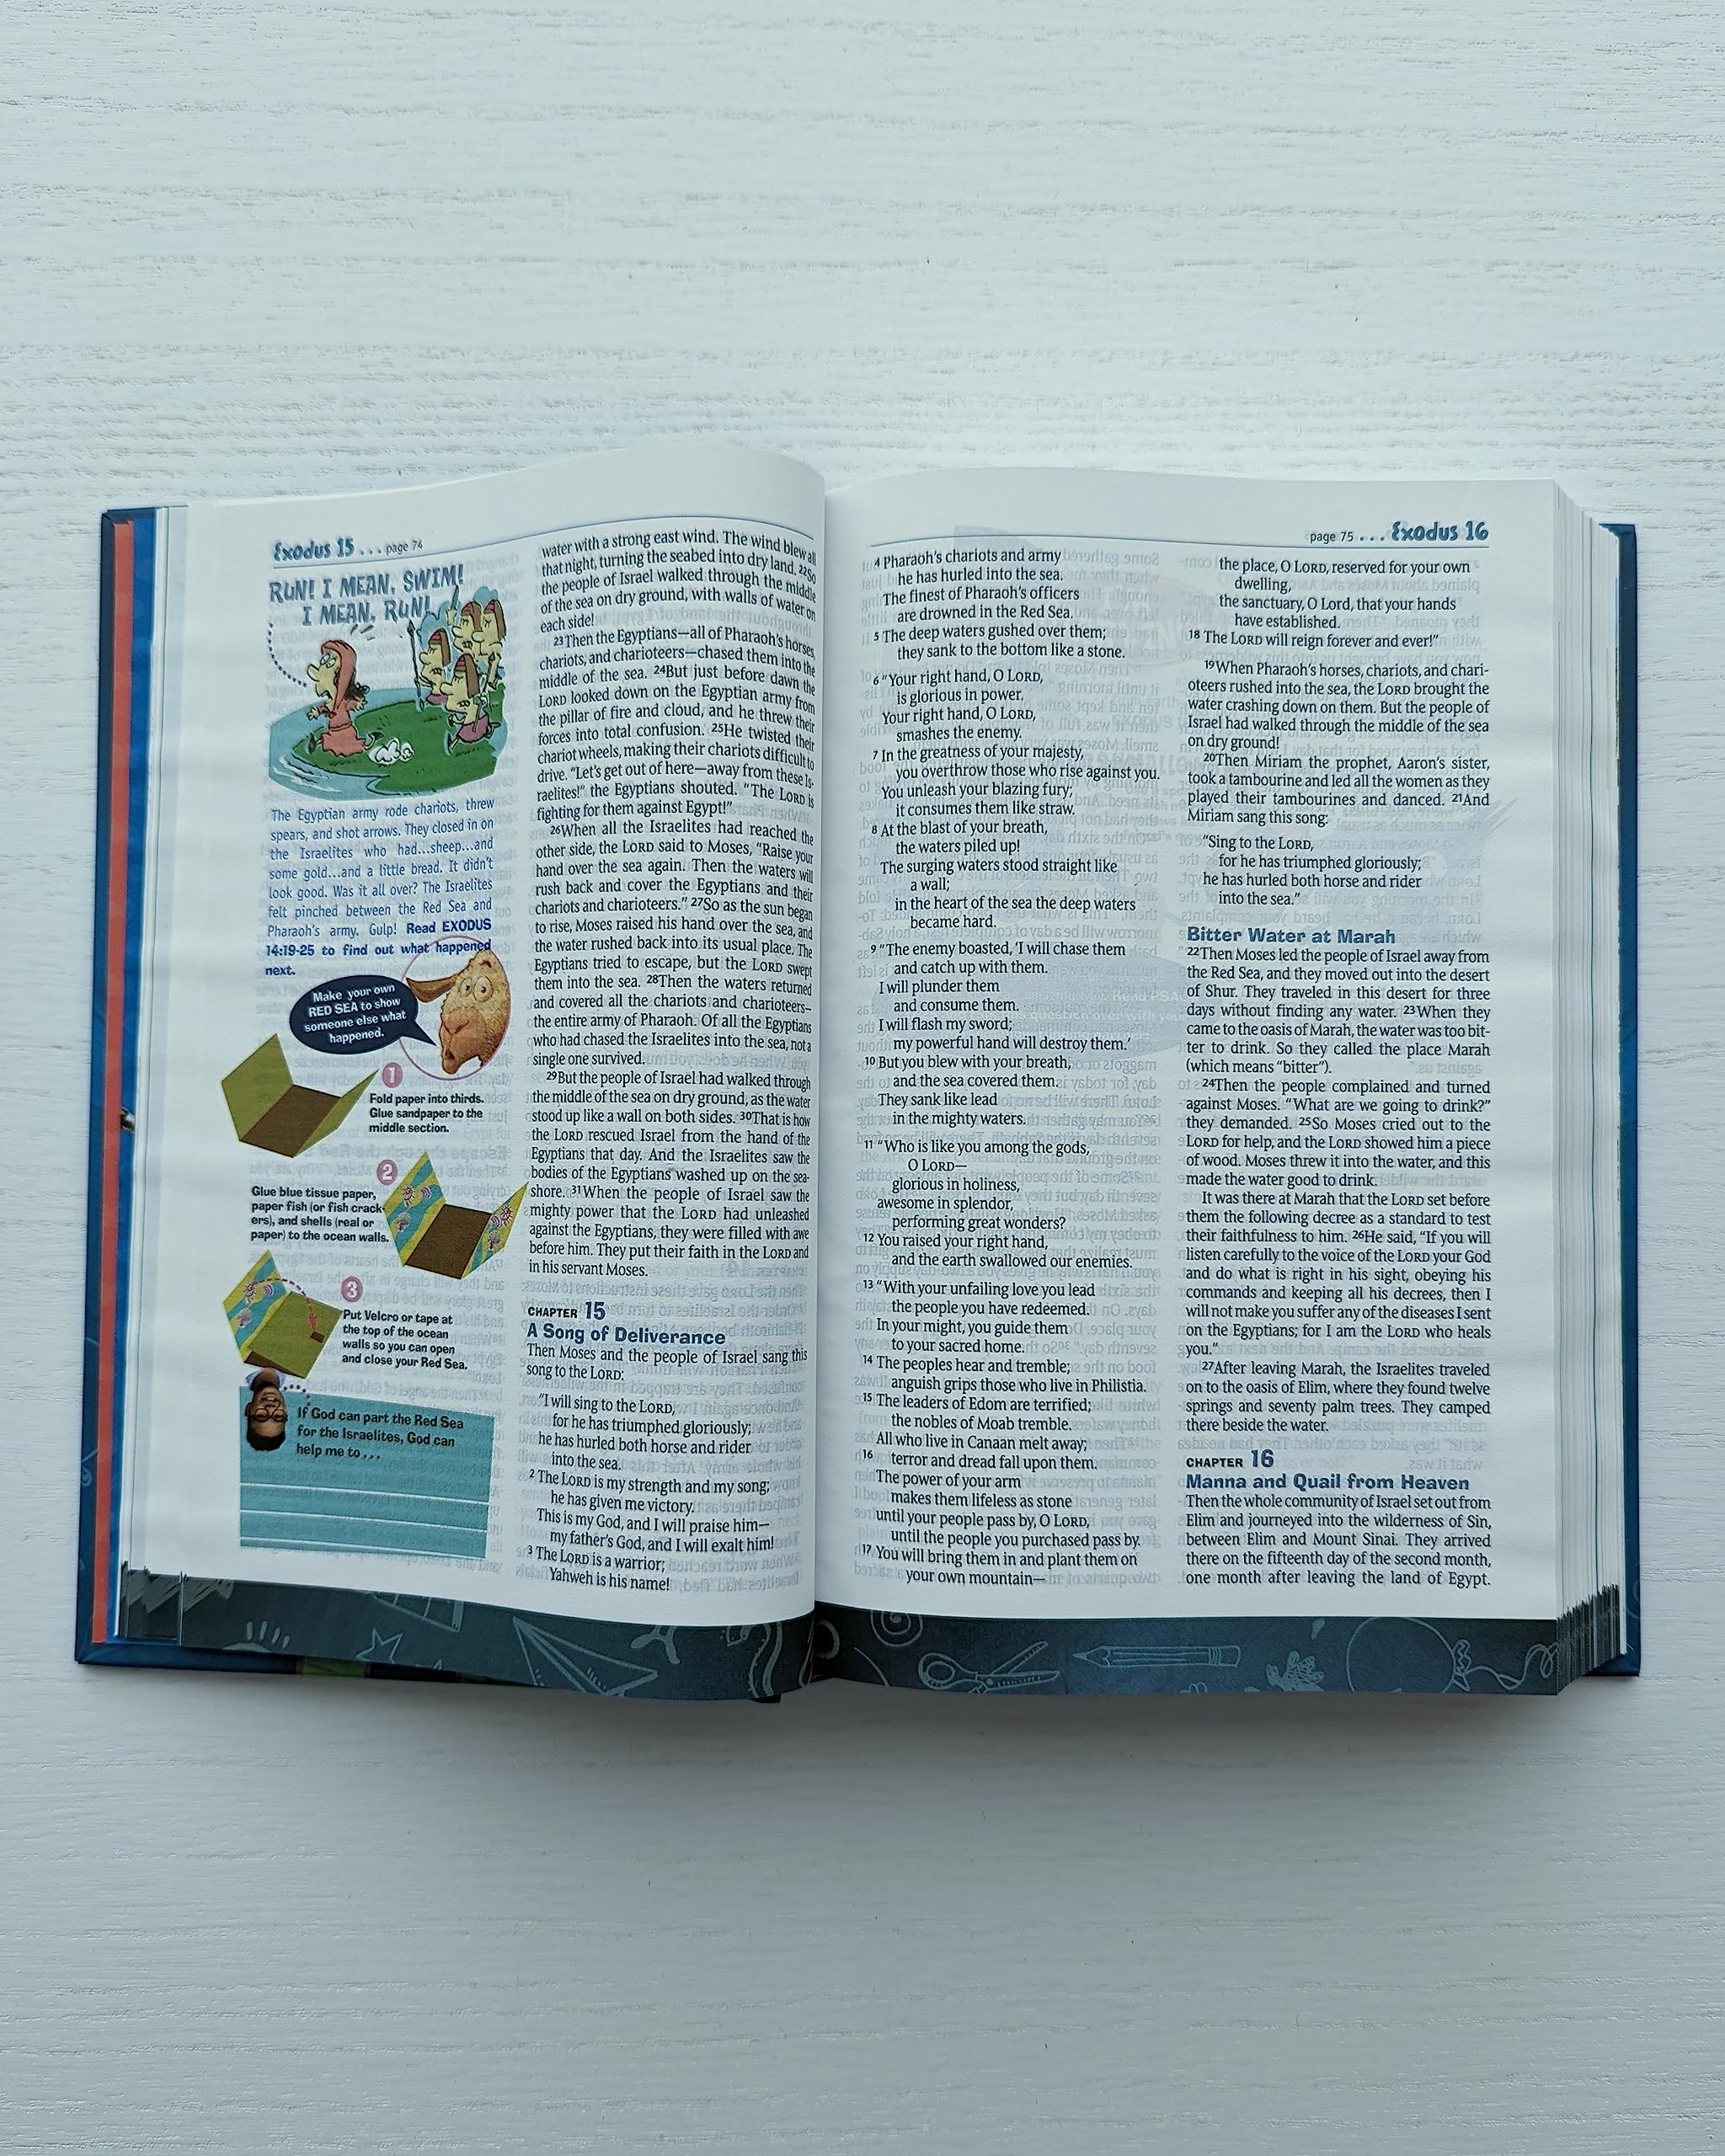 NLT Hands-On Bible, Third Edition (Hardcover)